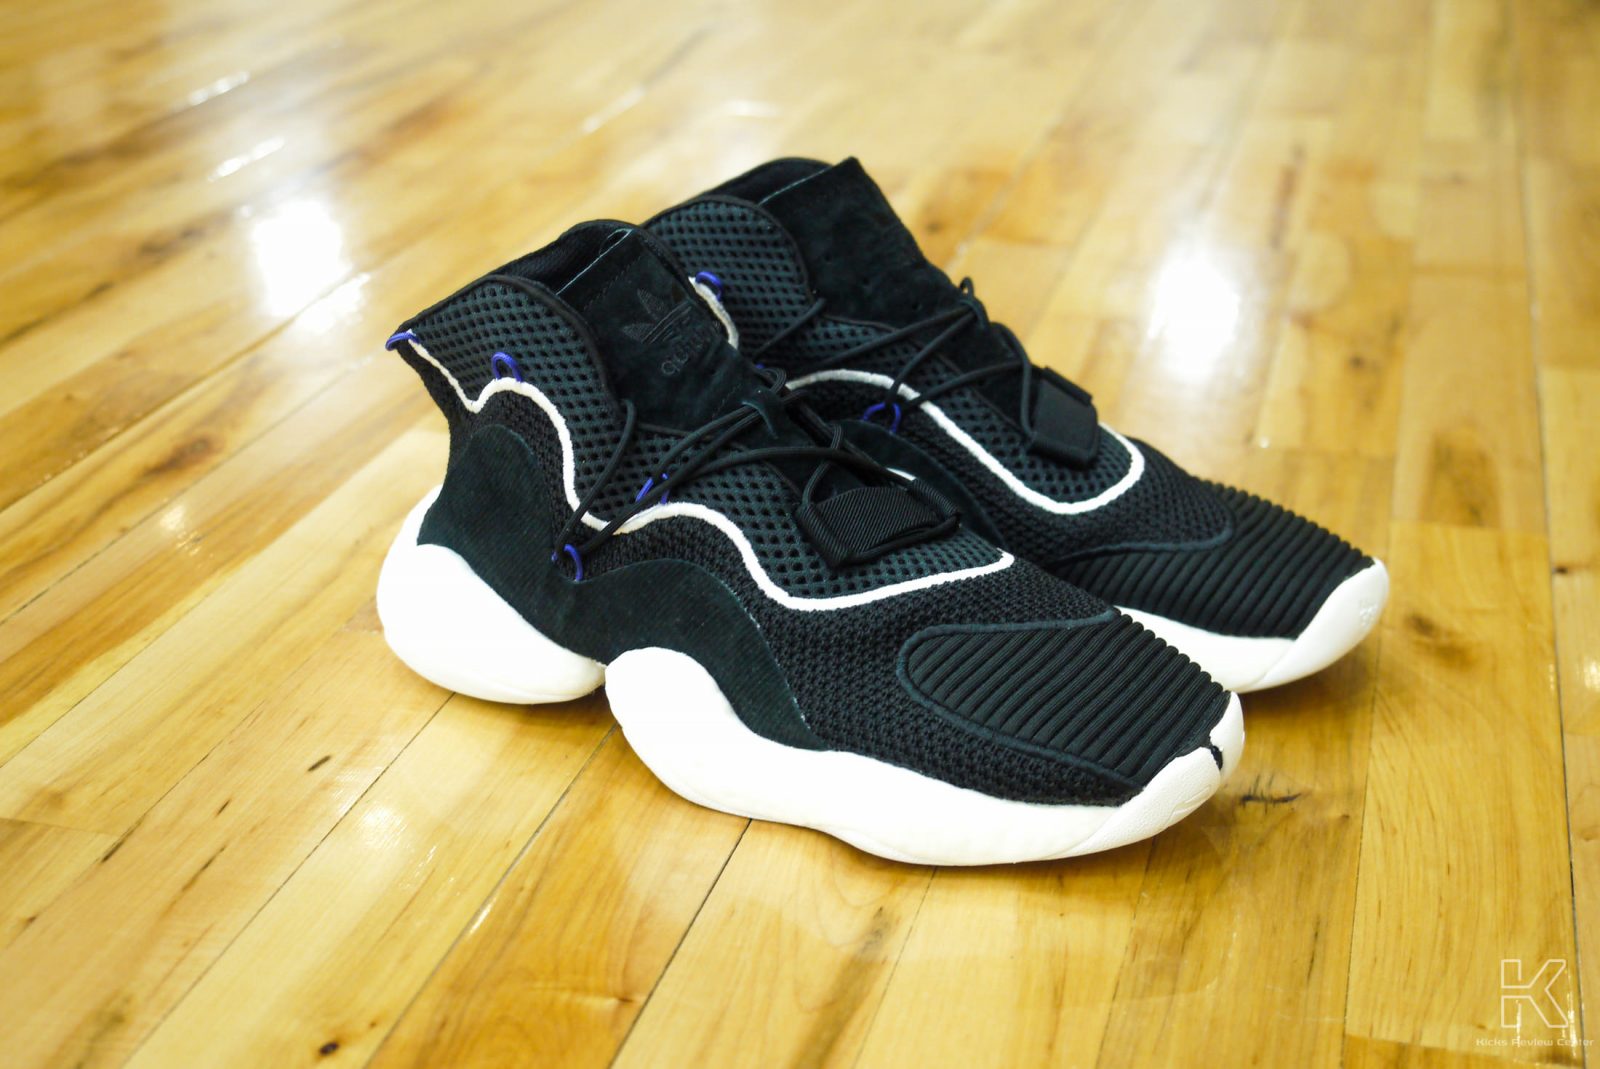 adidas crazy byw basketball review